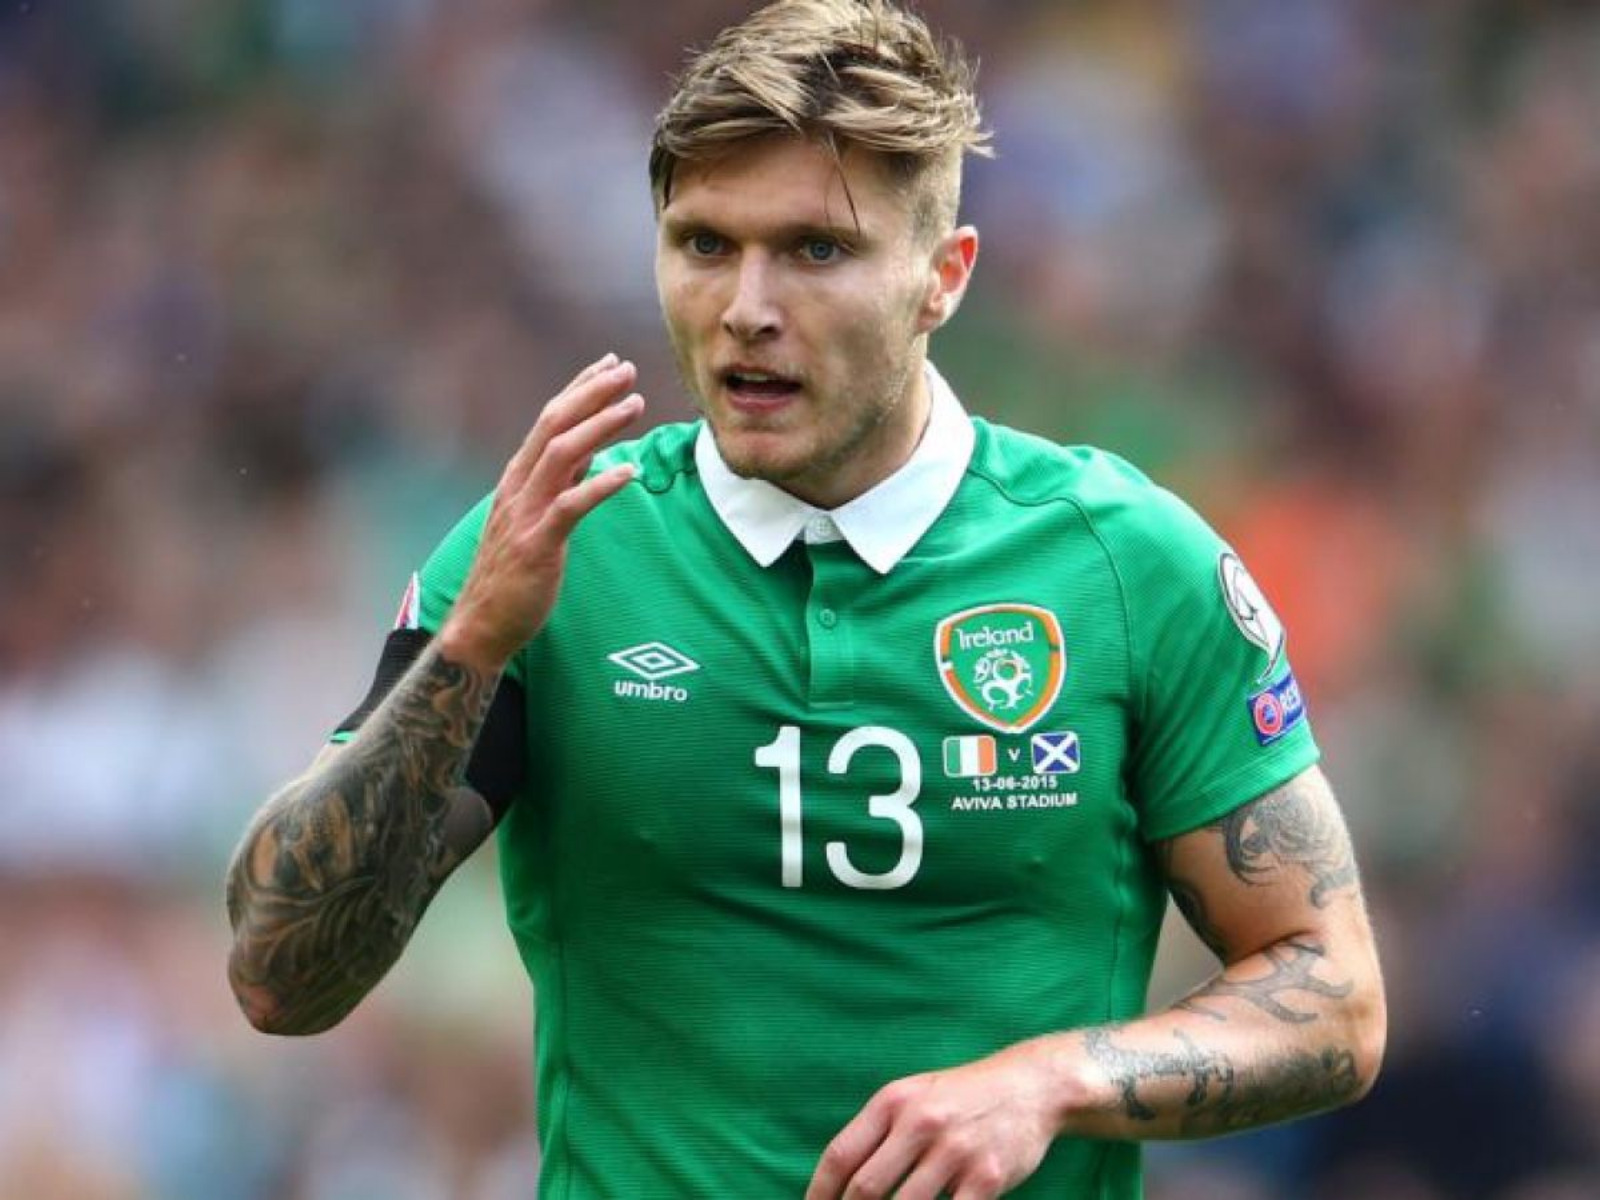 Newcastle is keen to sign with Jeff Hendrick this season